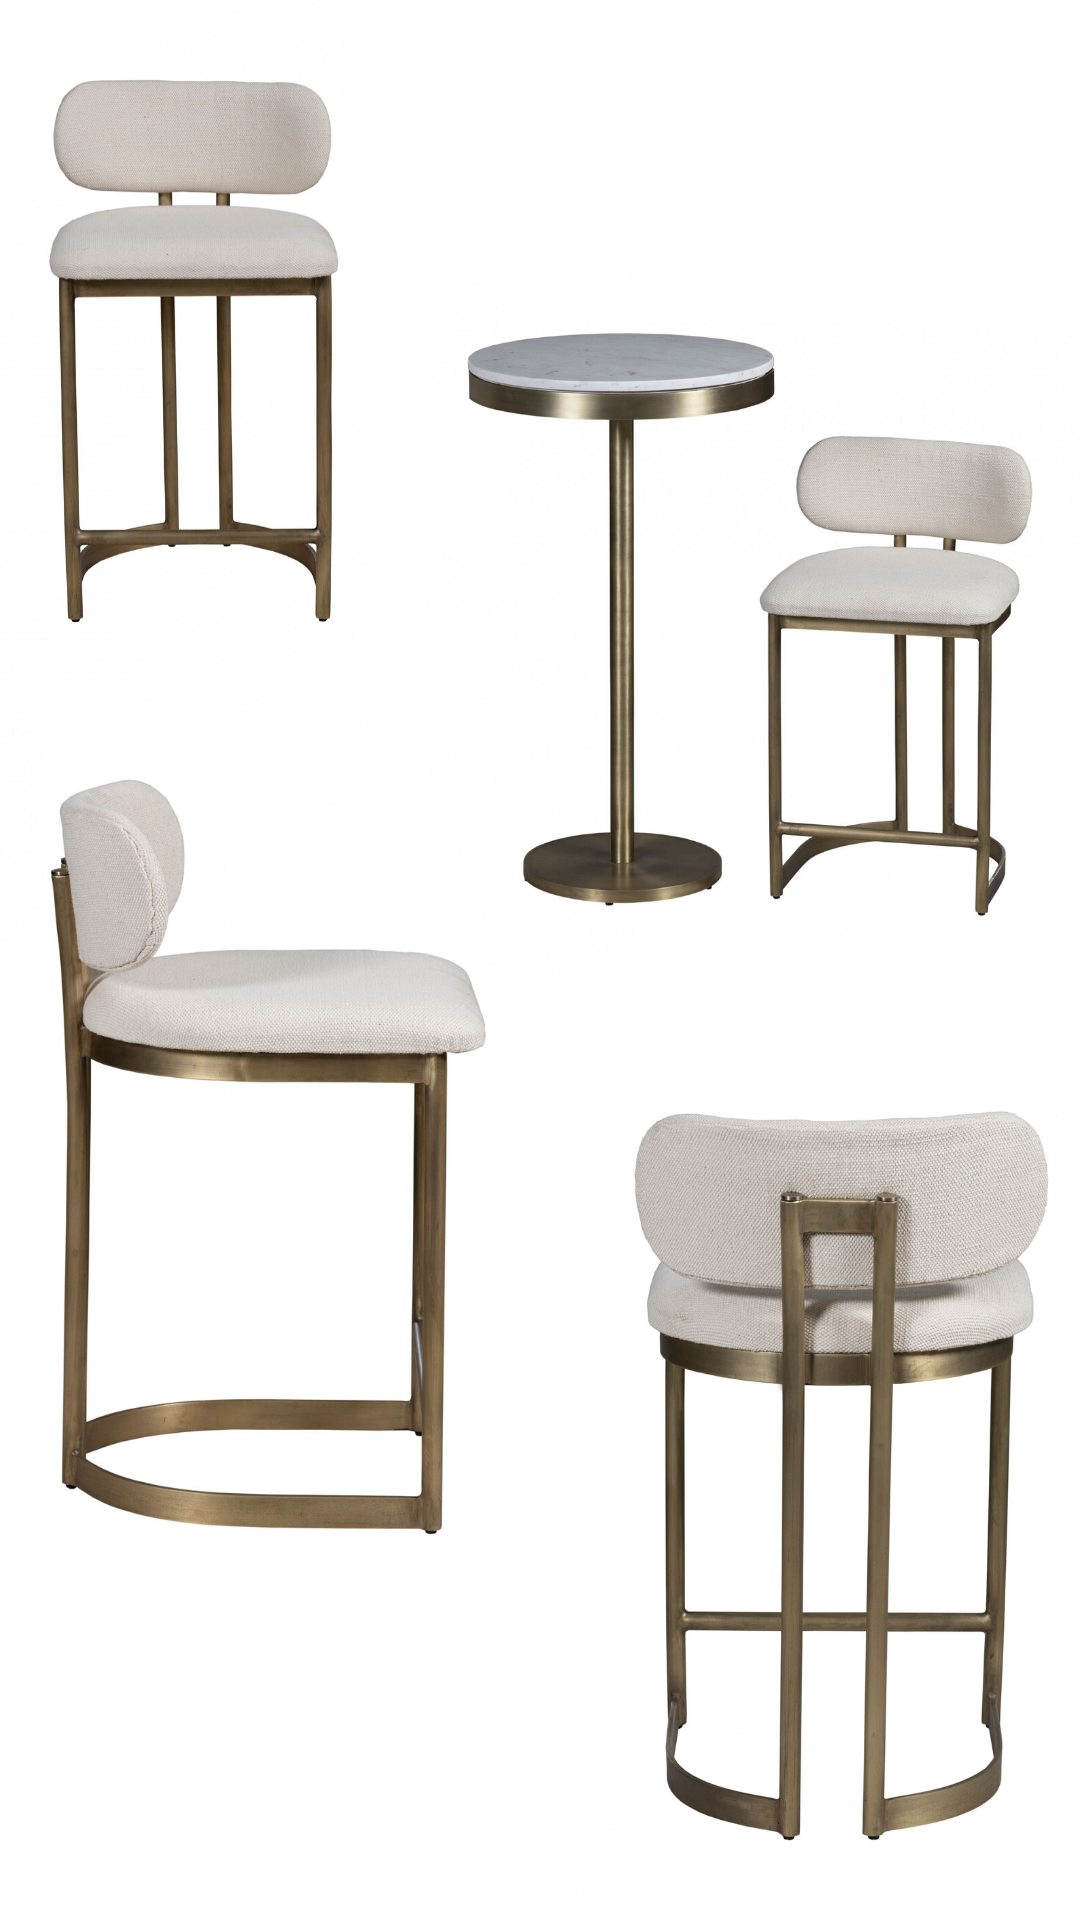 round-up-of-counter-stools-done-right-union-home-shay-counter-stool-kathleen-jennison-stpckton-california-interior-designer.png